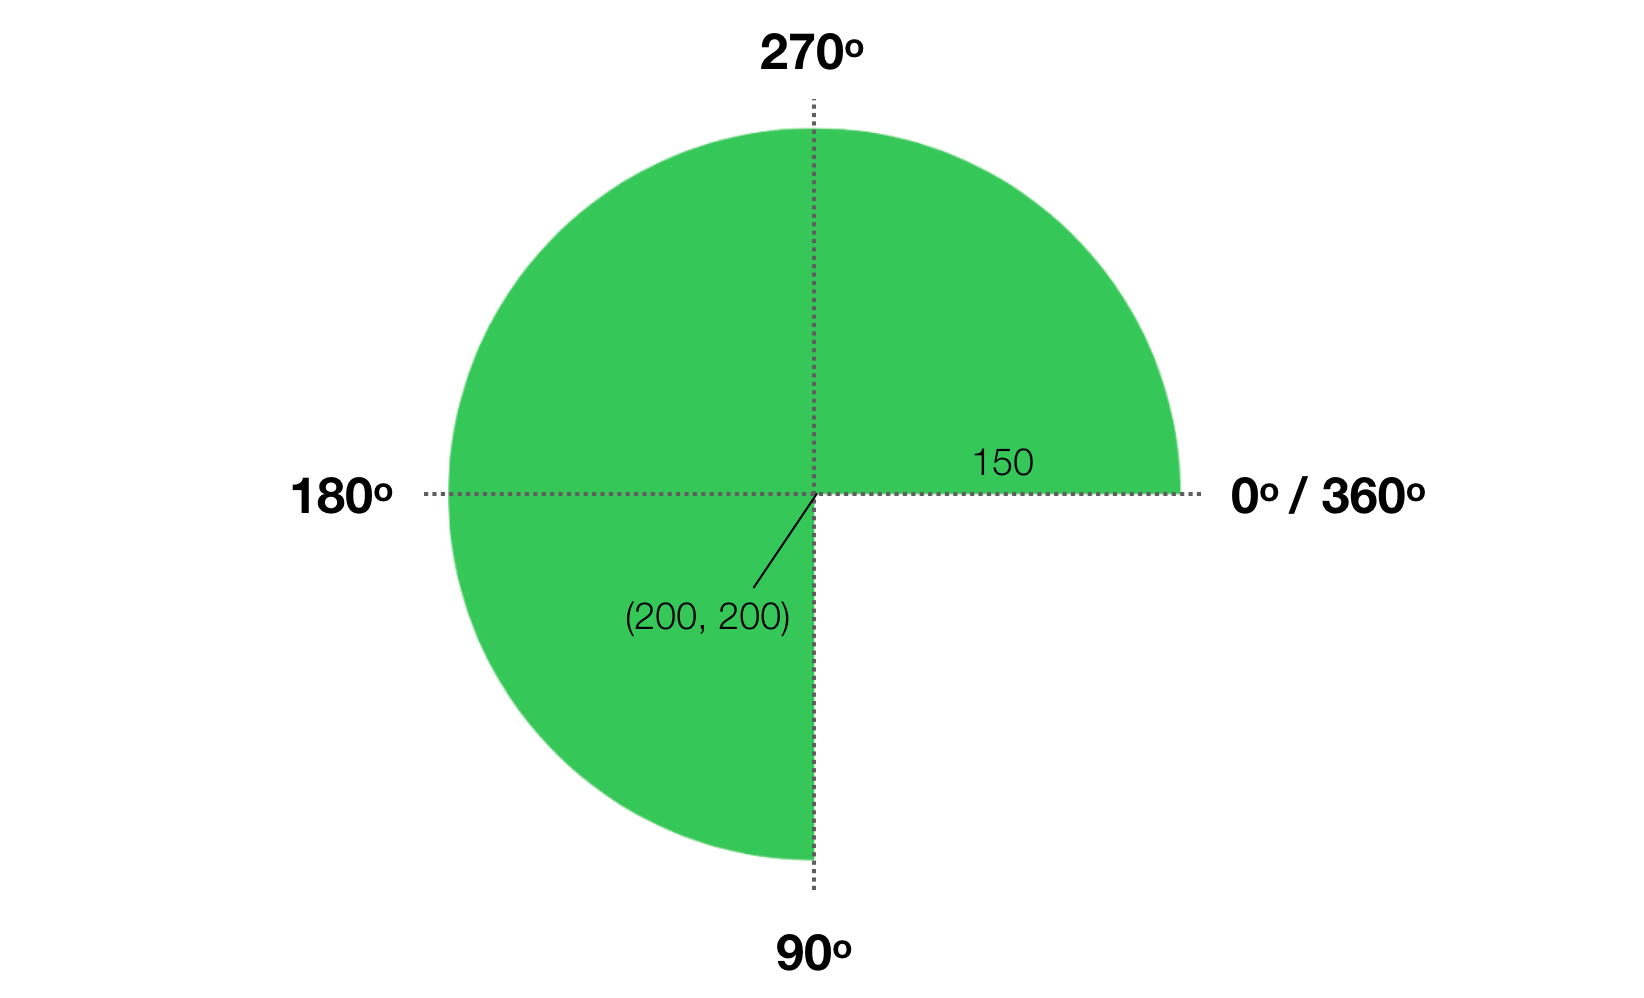 swiftui-pie-chart-explained